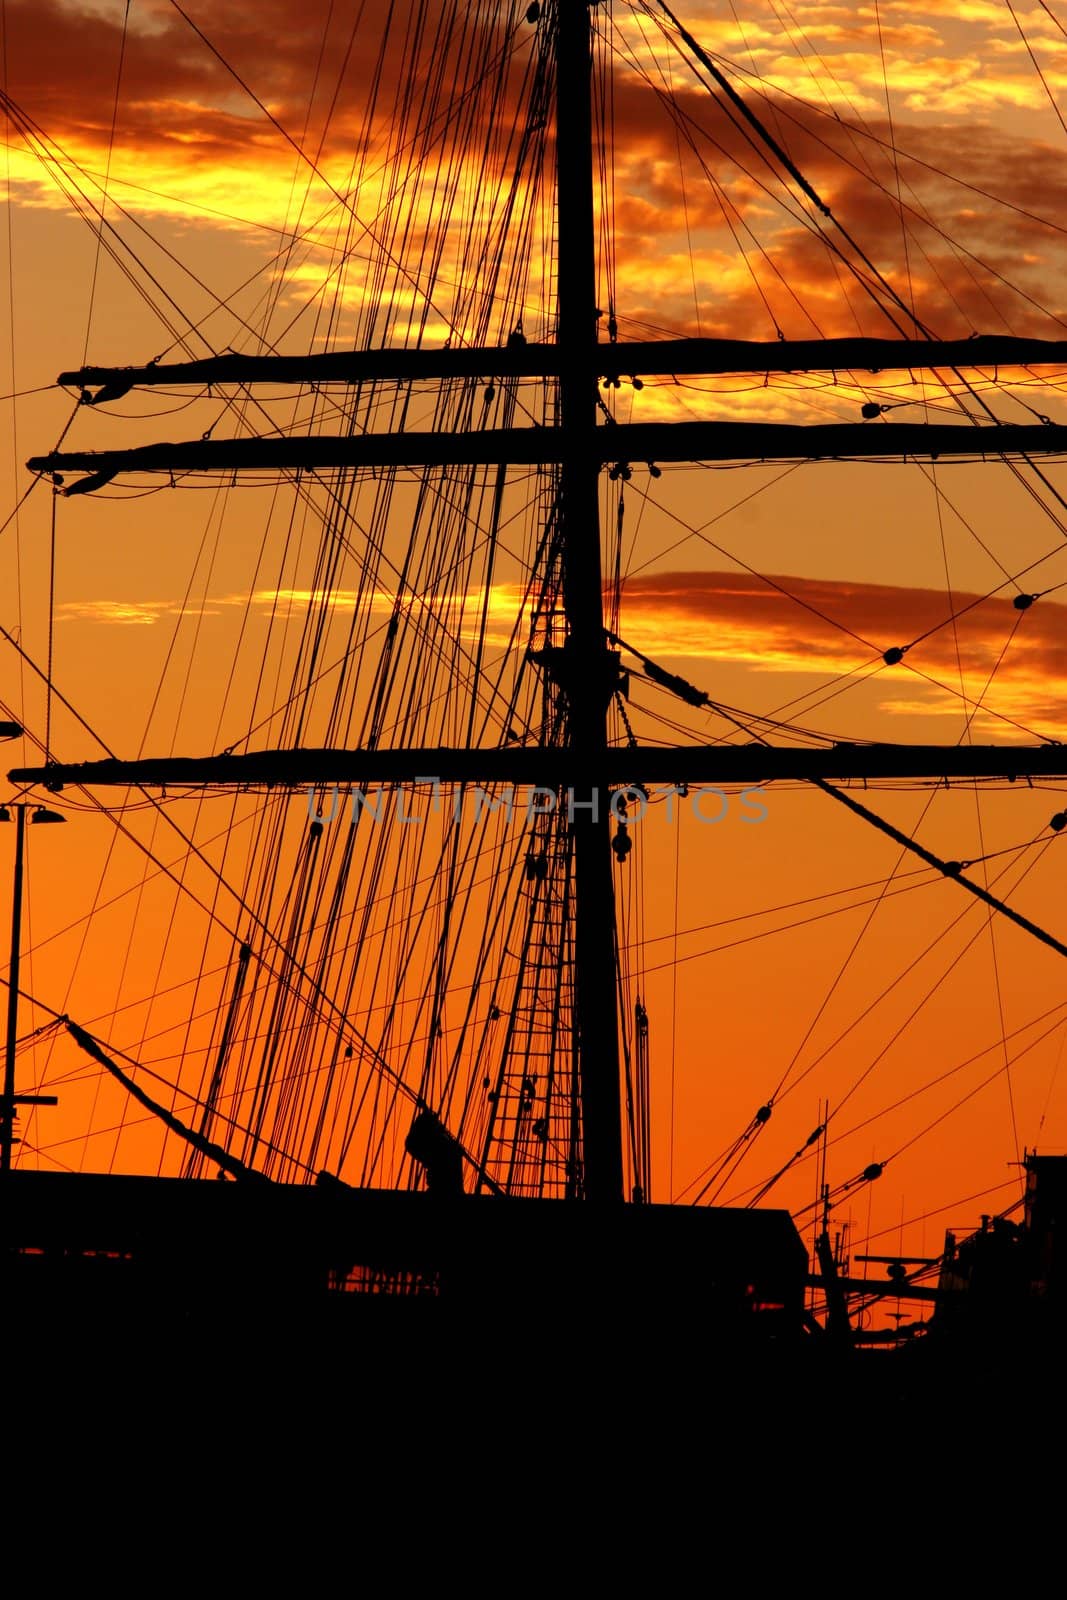 Silhouette of a schooner against the sunset